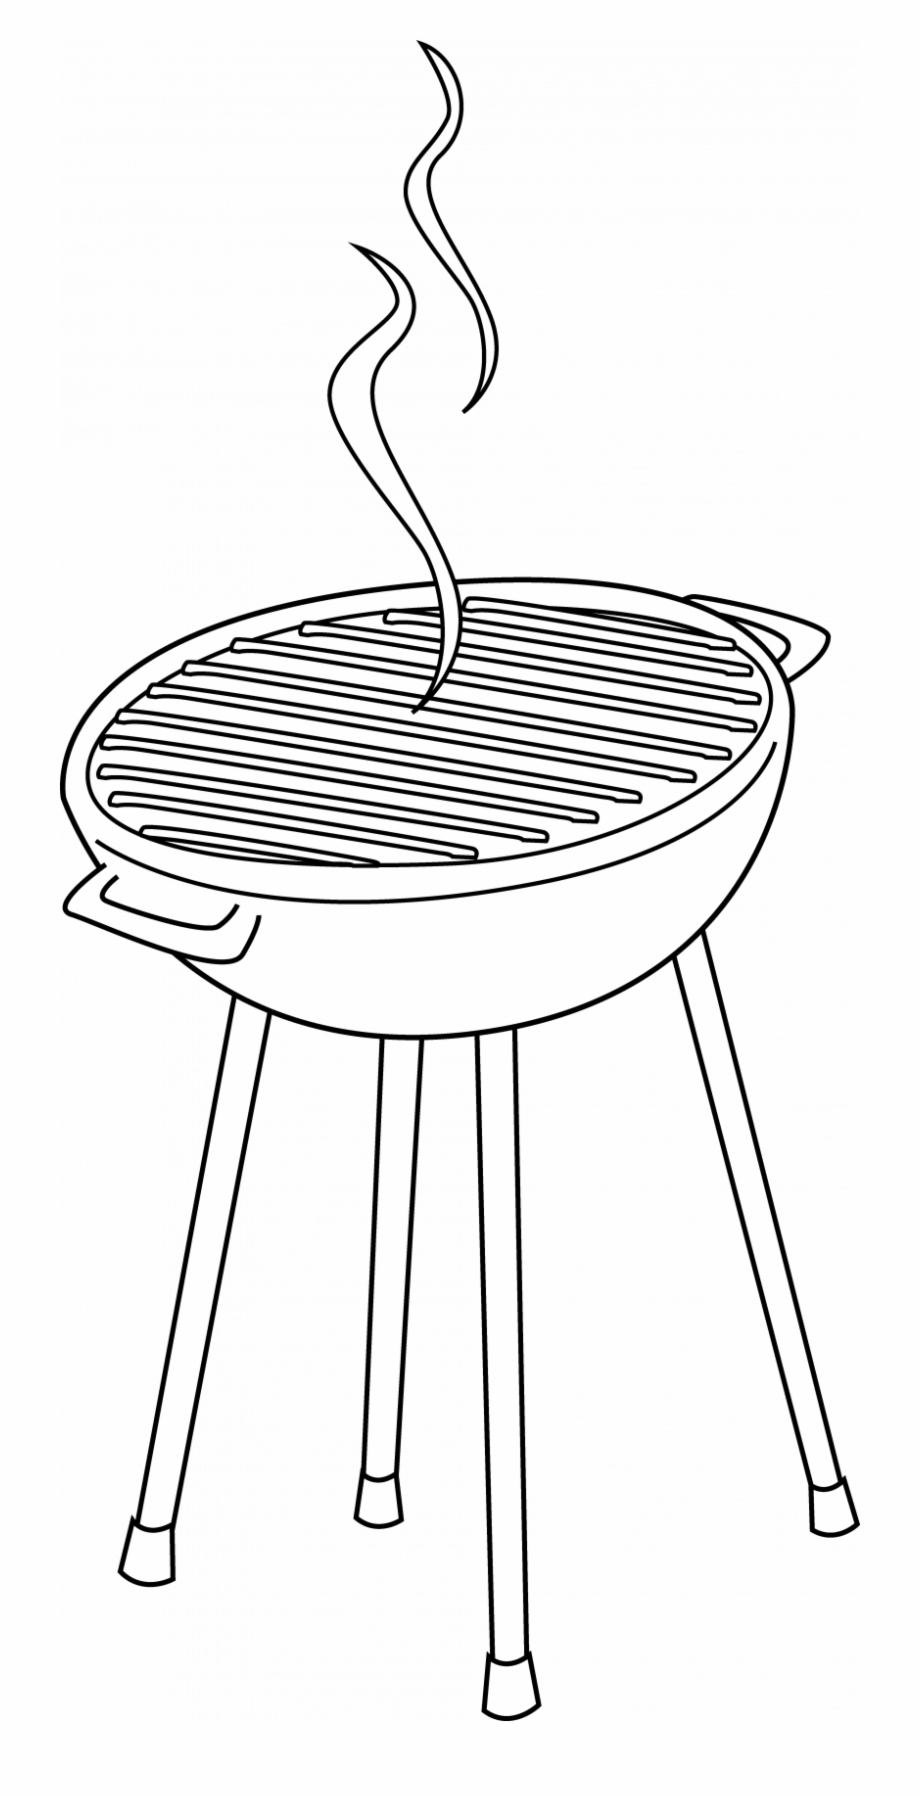 Barbeque Grill Clip Art Free